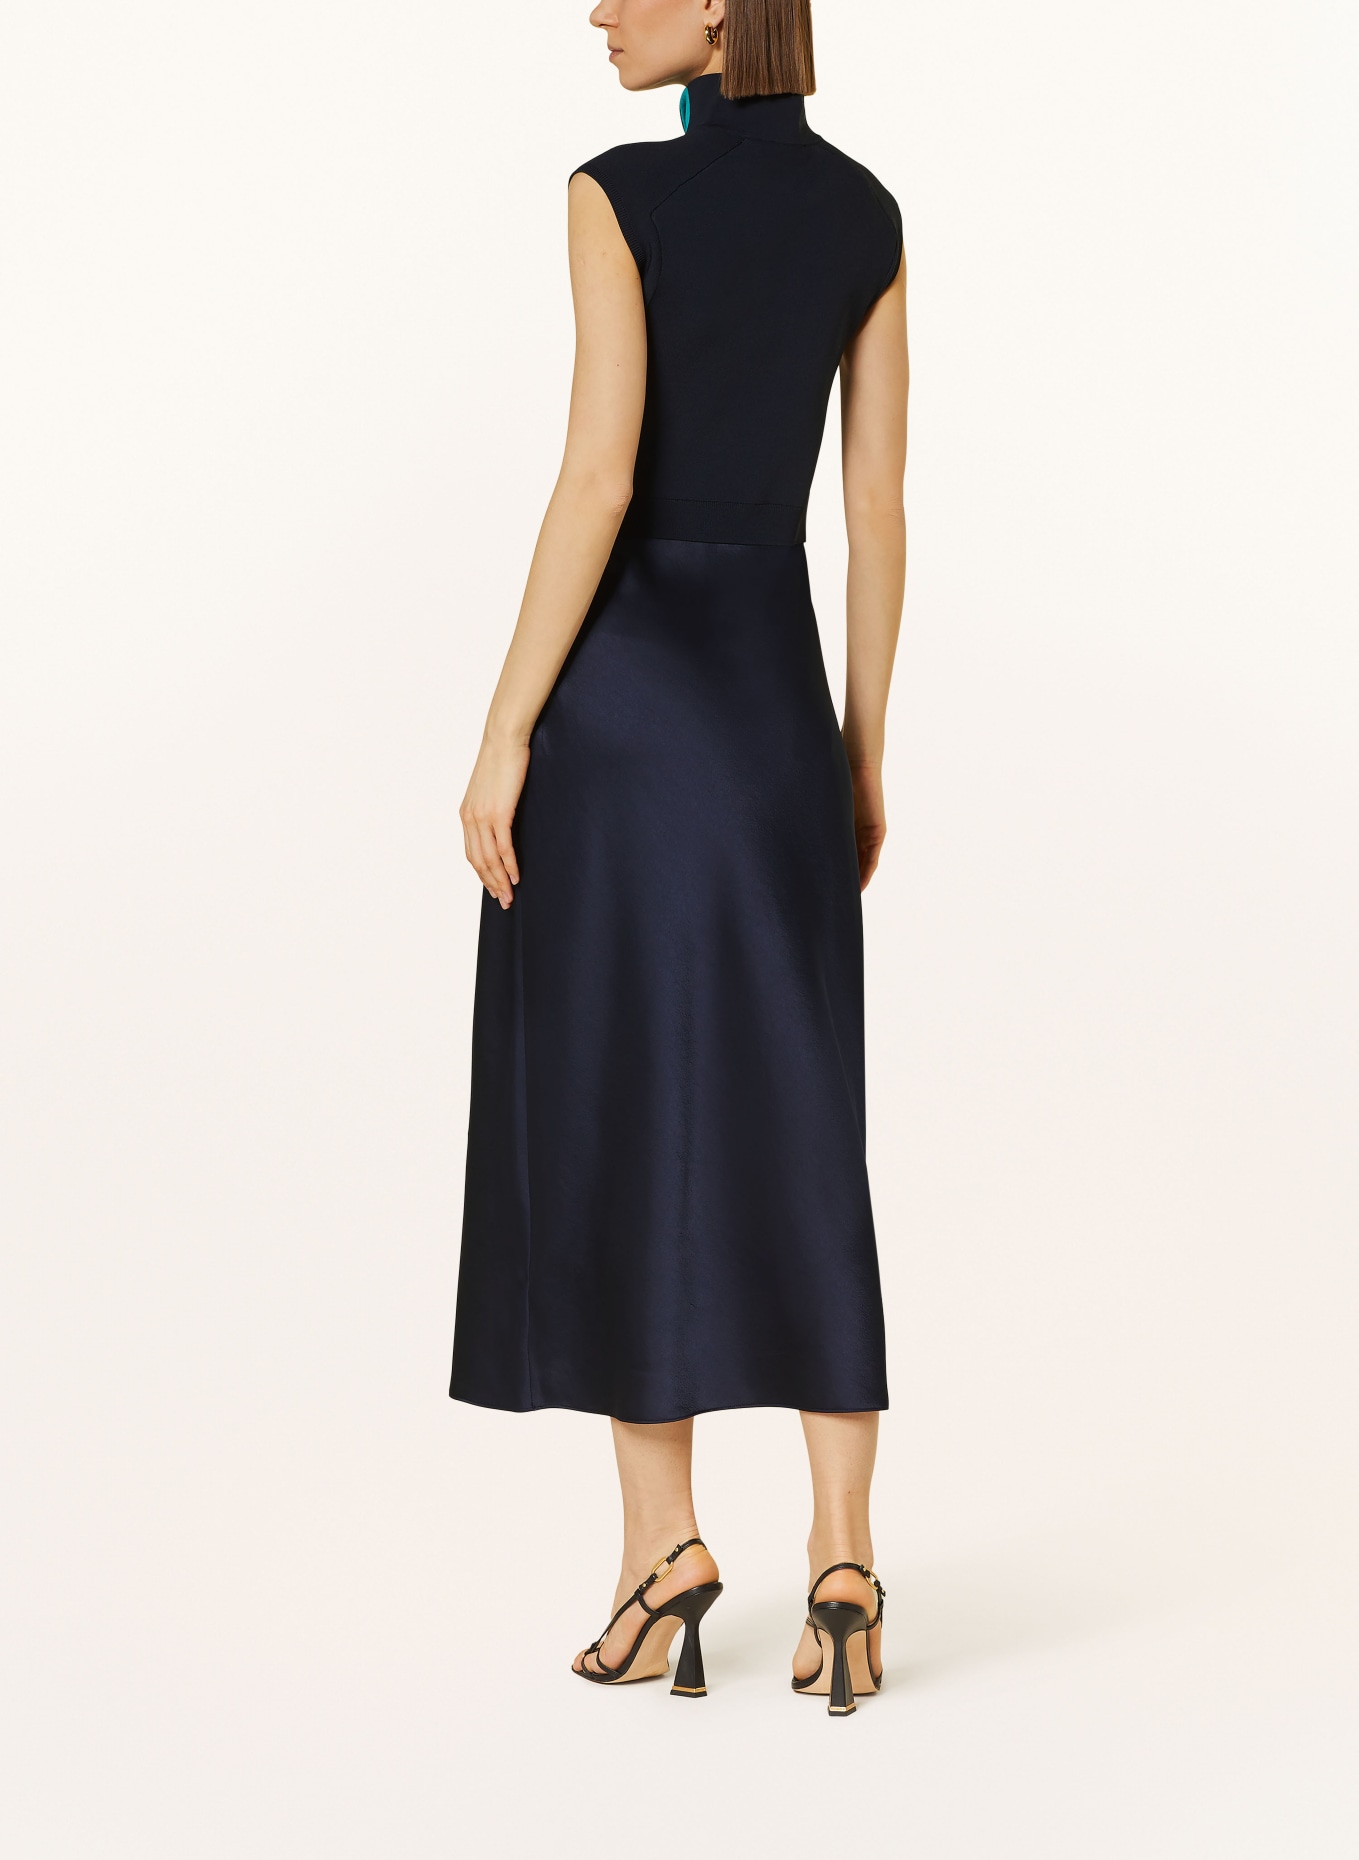 TED BAKER Kleid PAOLLA im Materialmix mit Cut-out, Farbe: DUNKELBLAU (Bild 3)